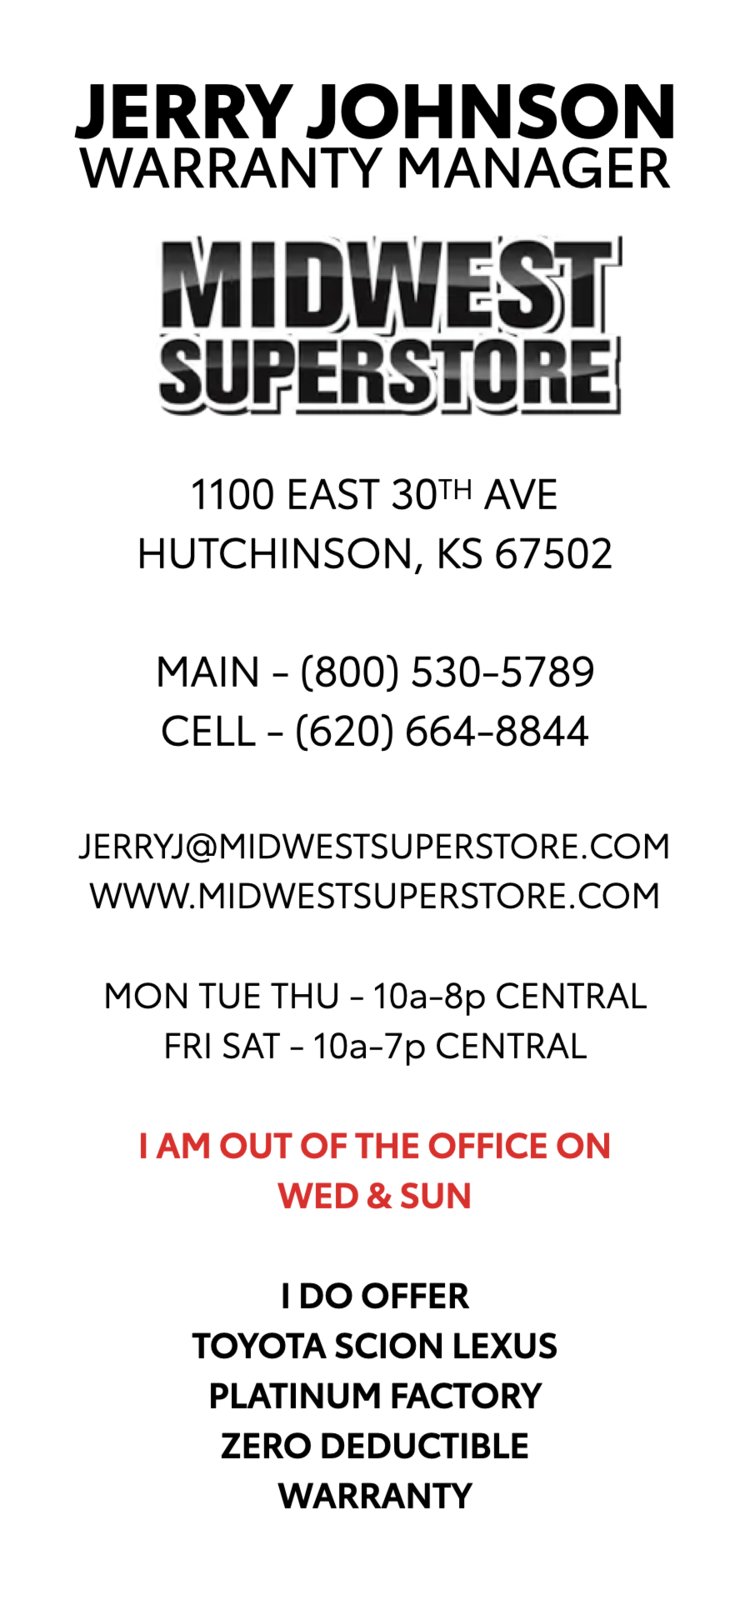 Jerry Johnson - Midwest Superstore.png